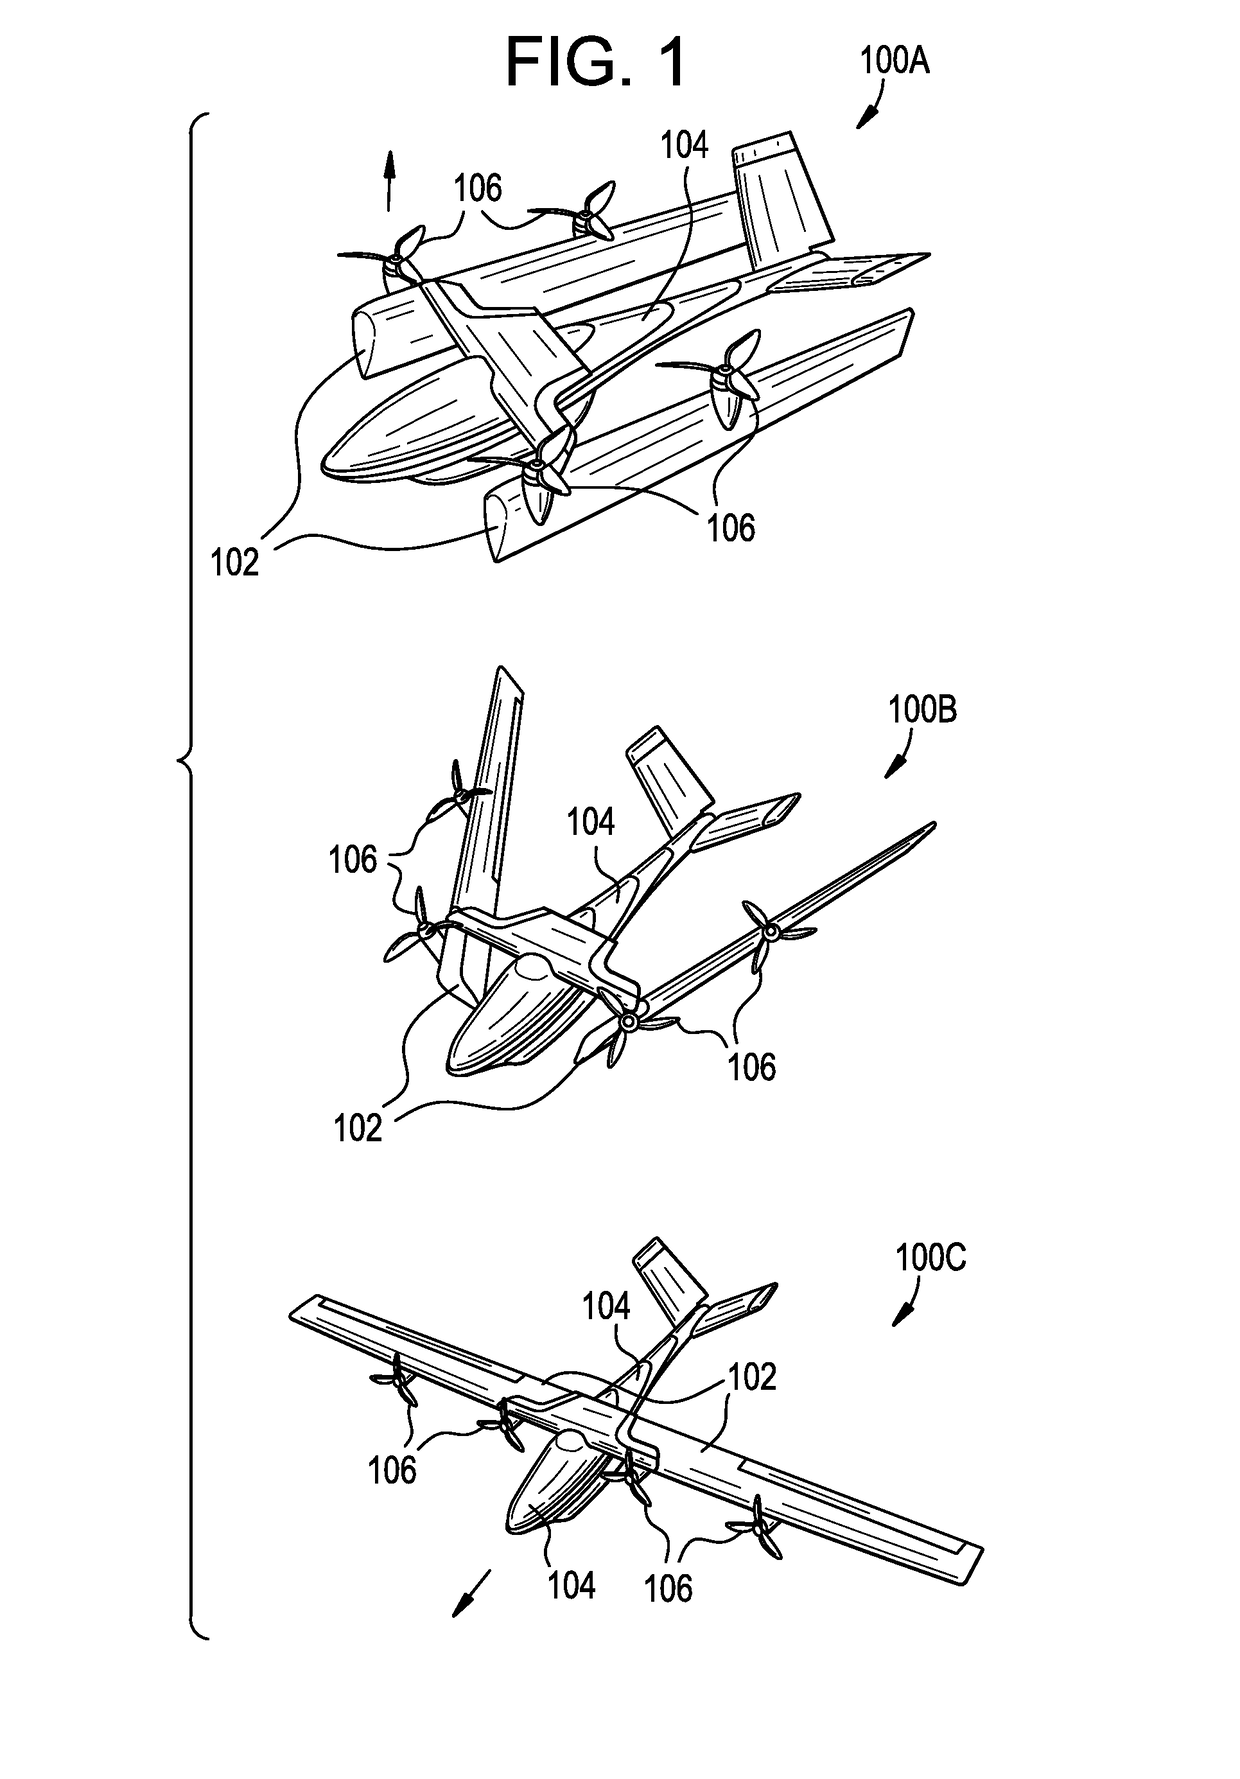 Vertical takeoff and landing airframe